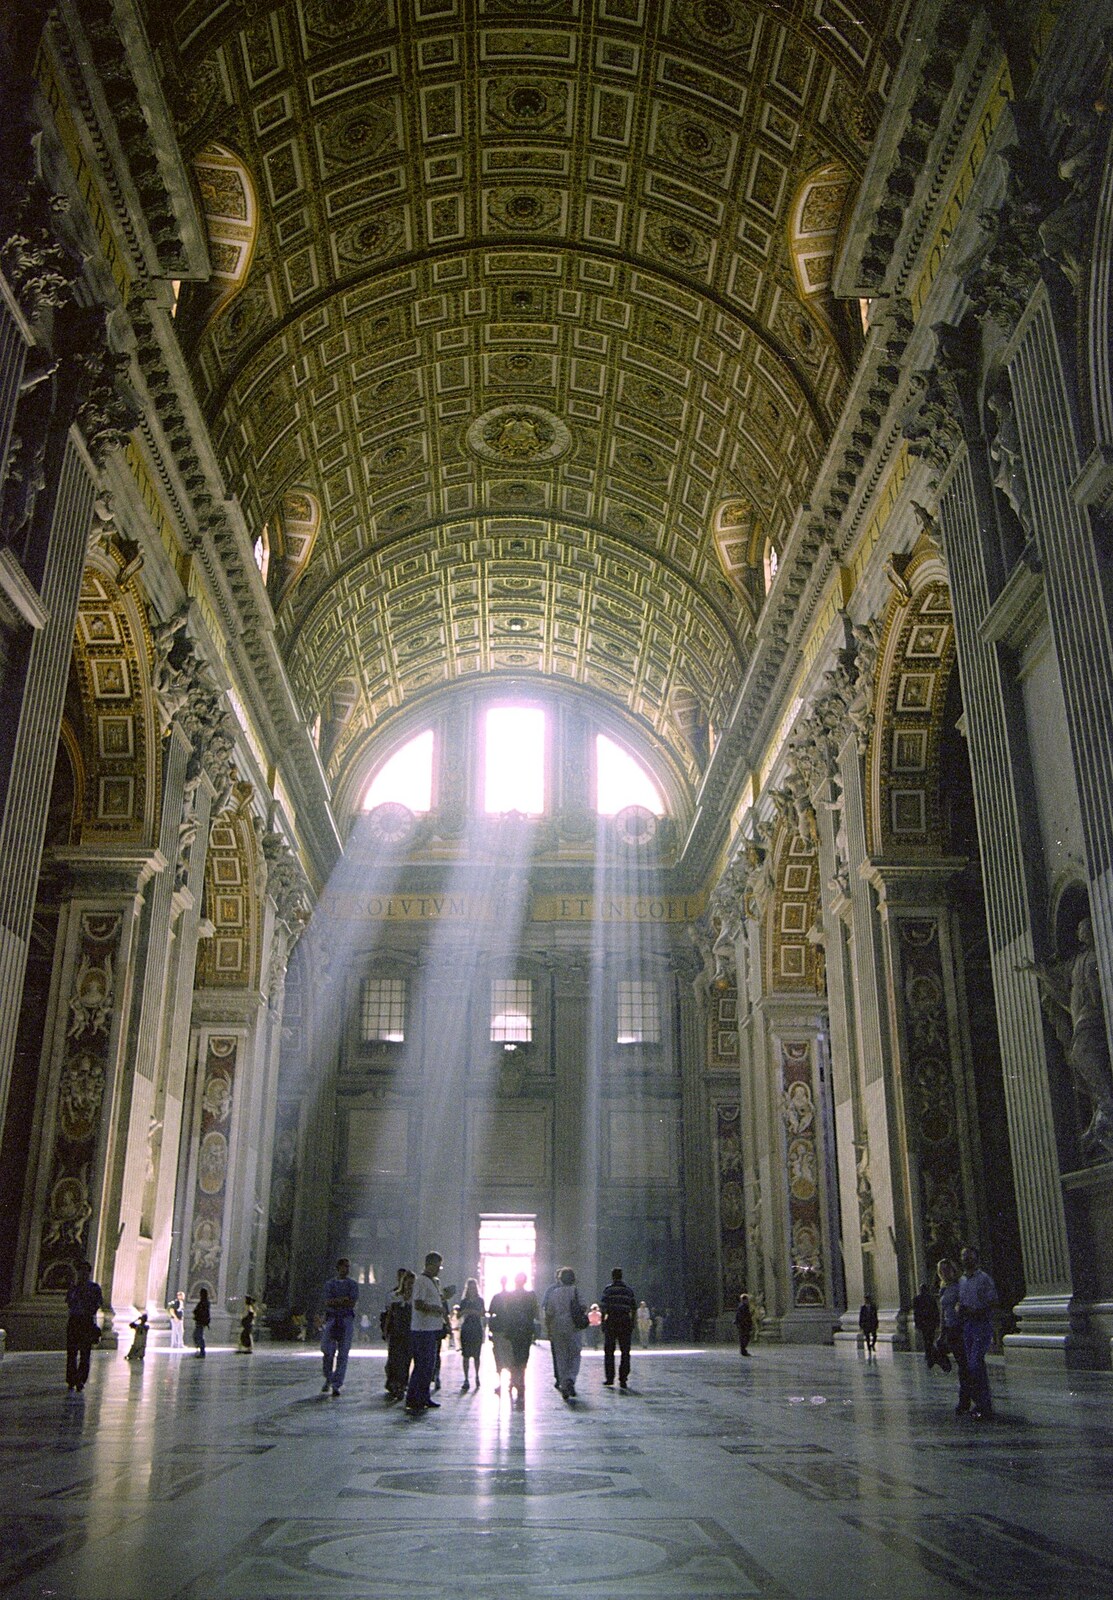 More shafts of light in St. Peter's from A Working Trip to Rome, Italy - 10th September 1999